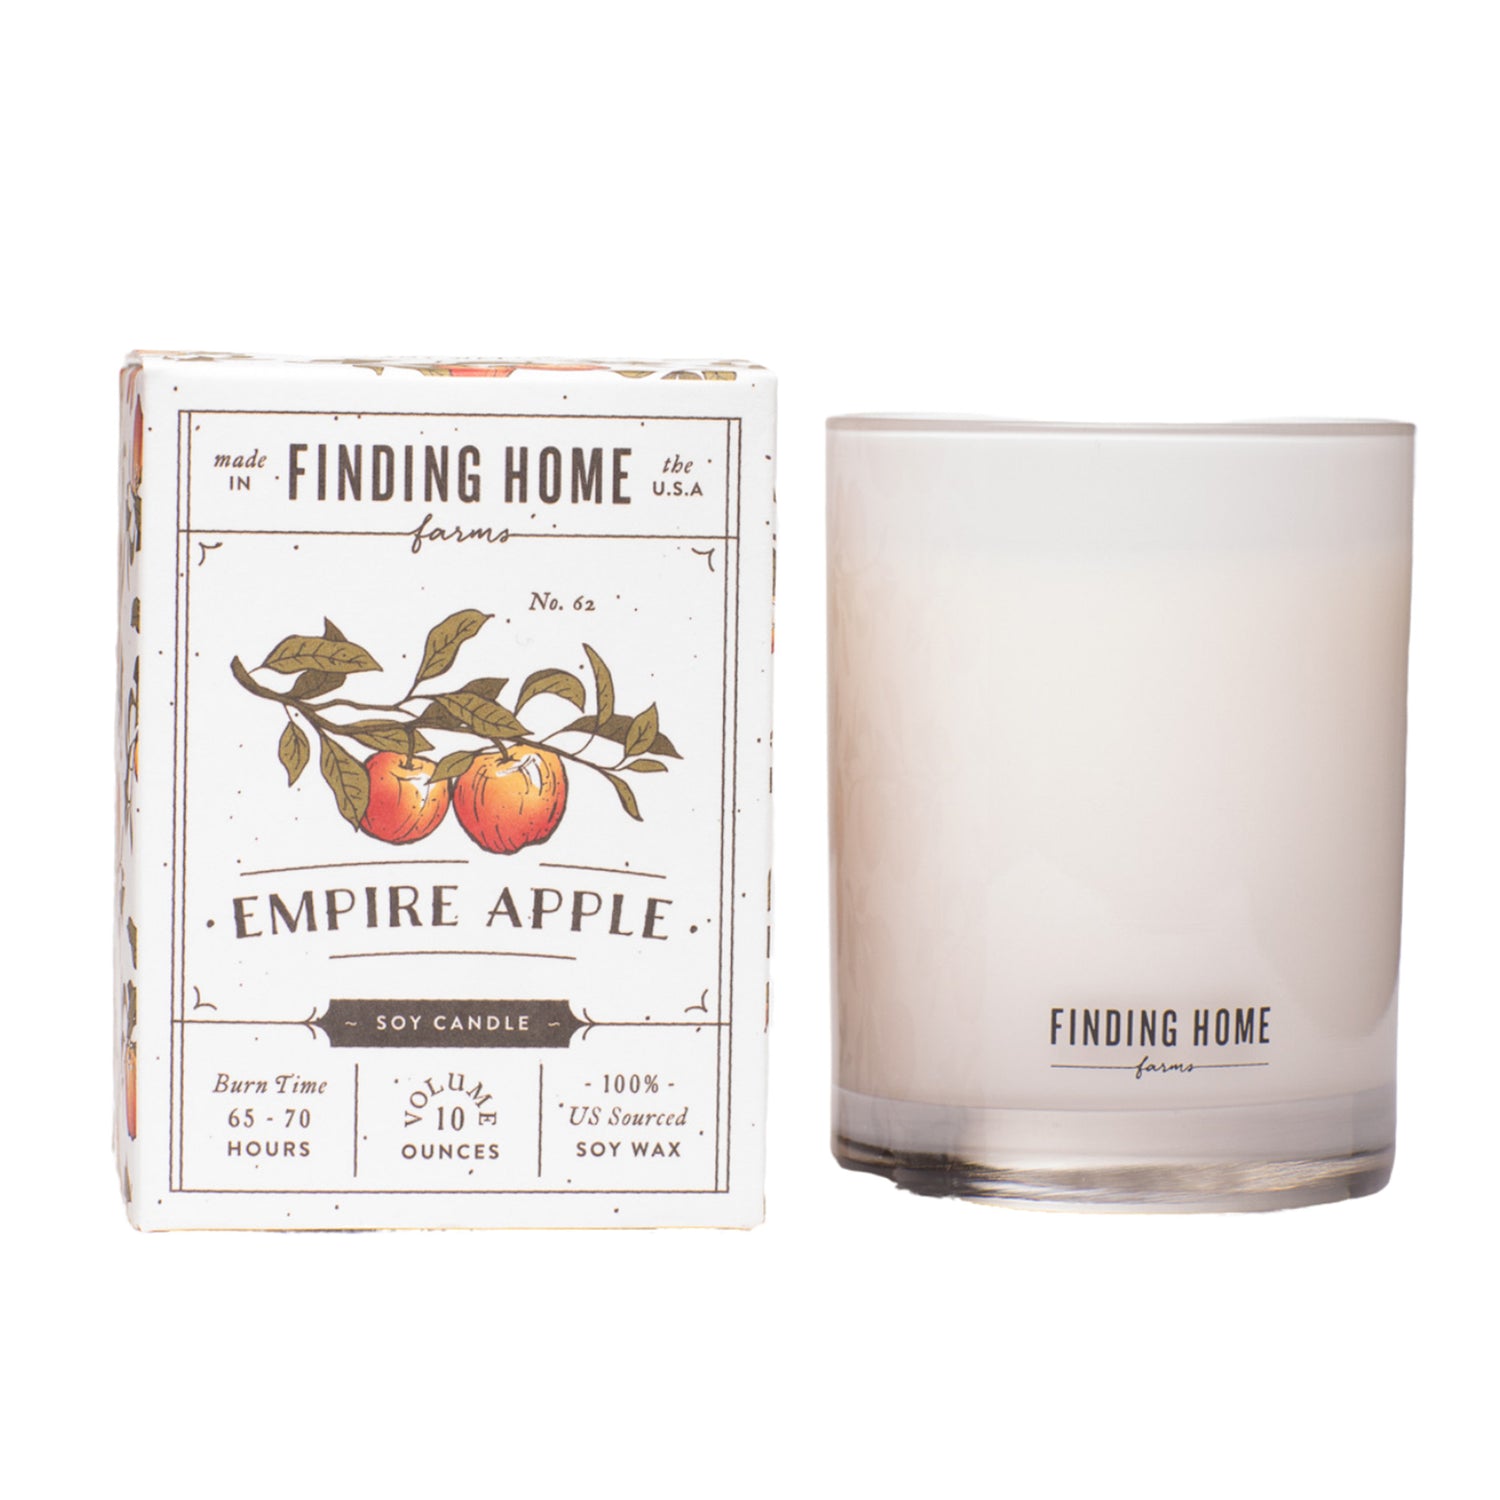 Finding Home Farms Empire Apple Soy Candles - Boxed Candle - 10 oz available at The Good Life Boutique